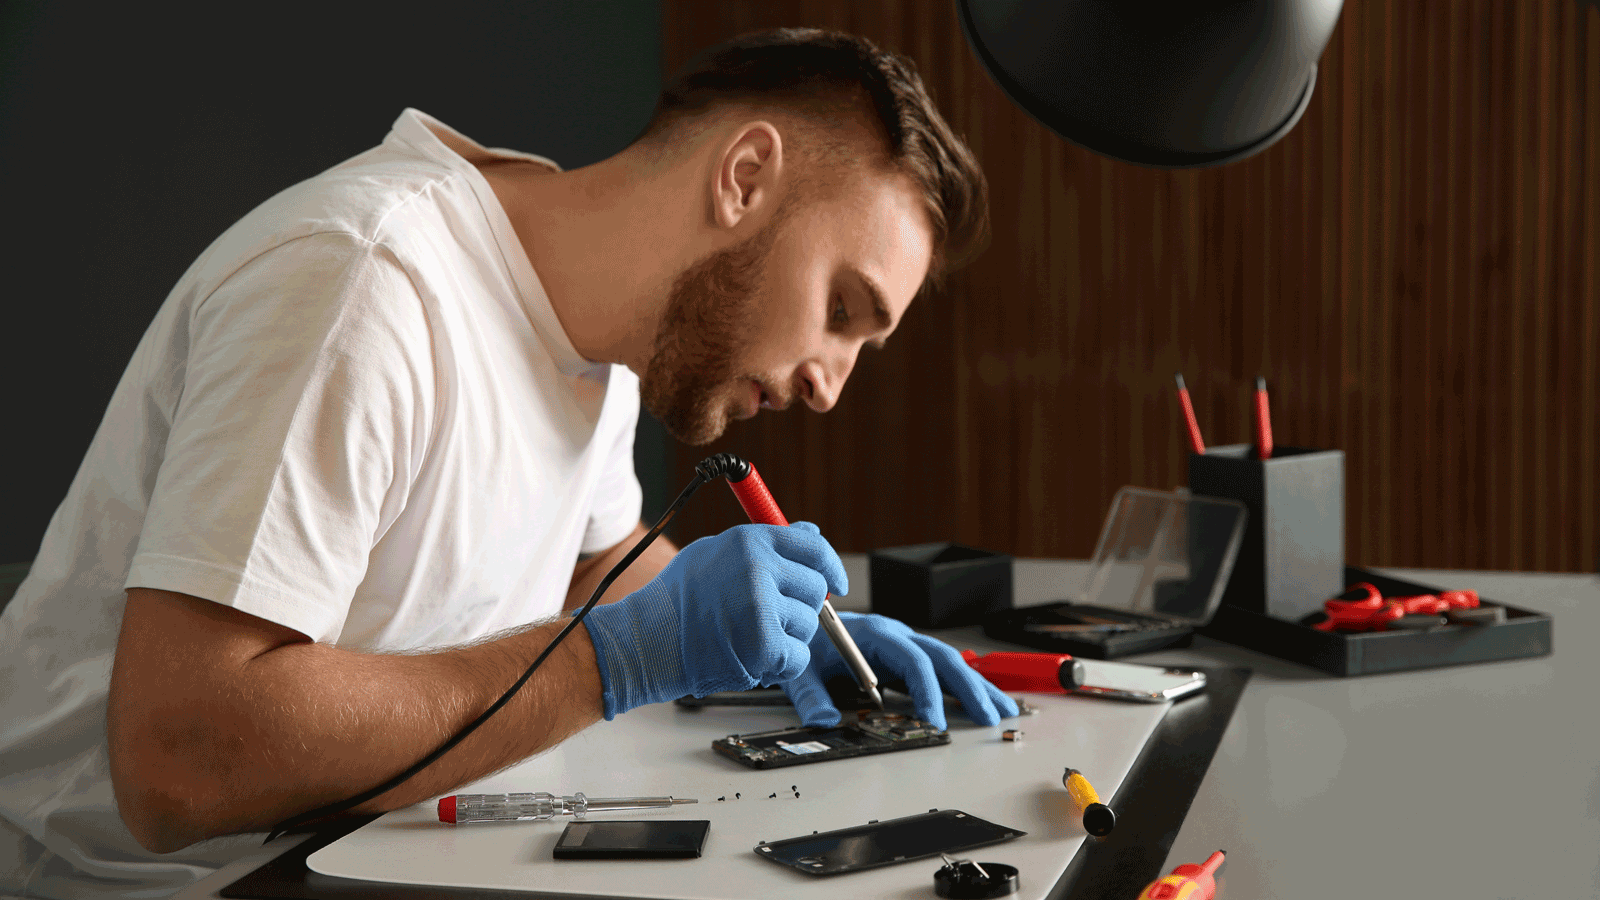 EU officially adopts new right-to-repair rules